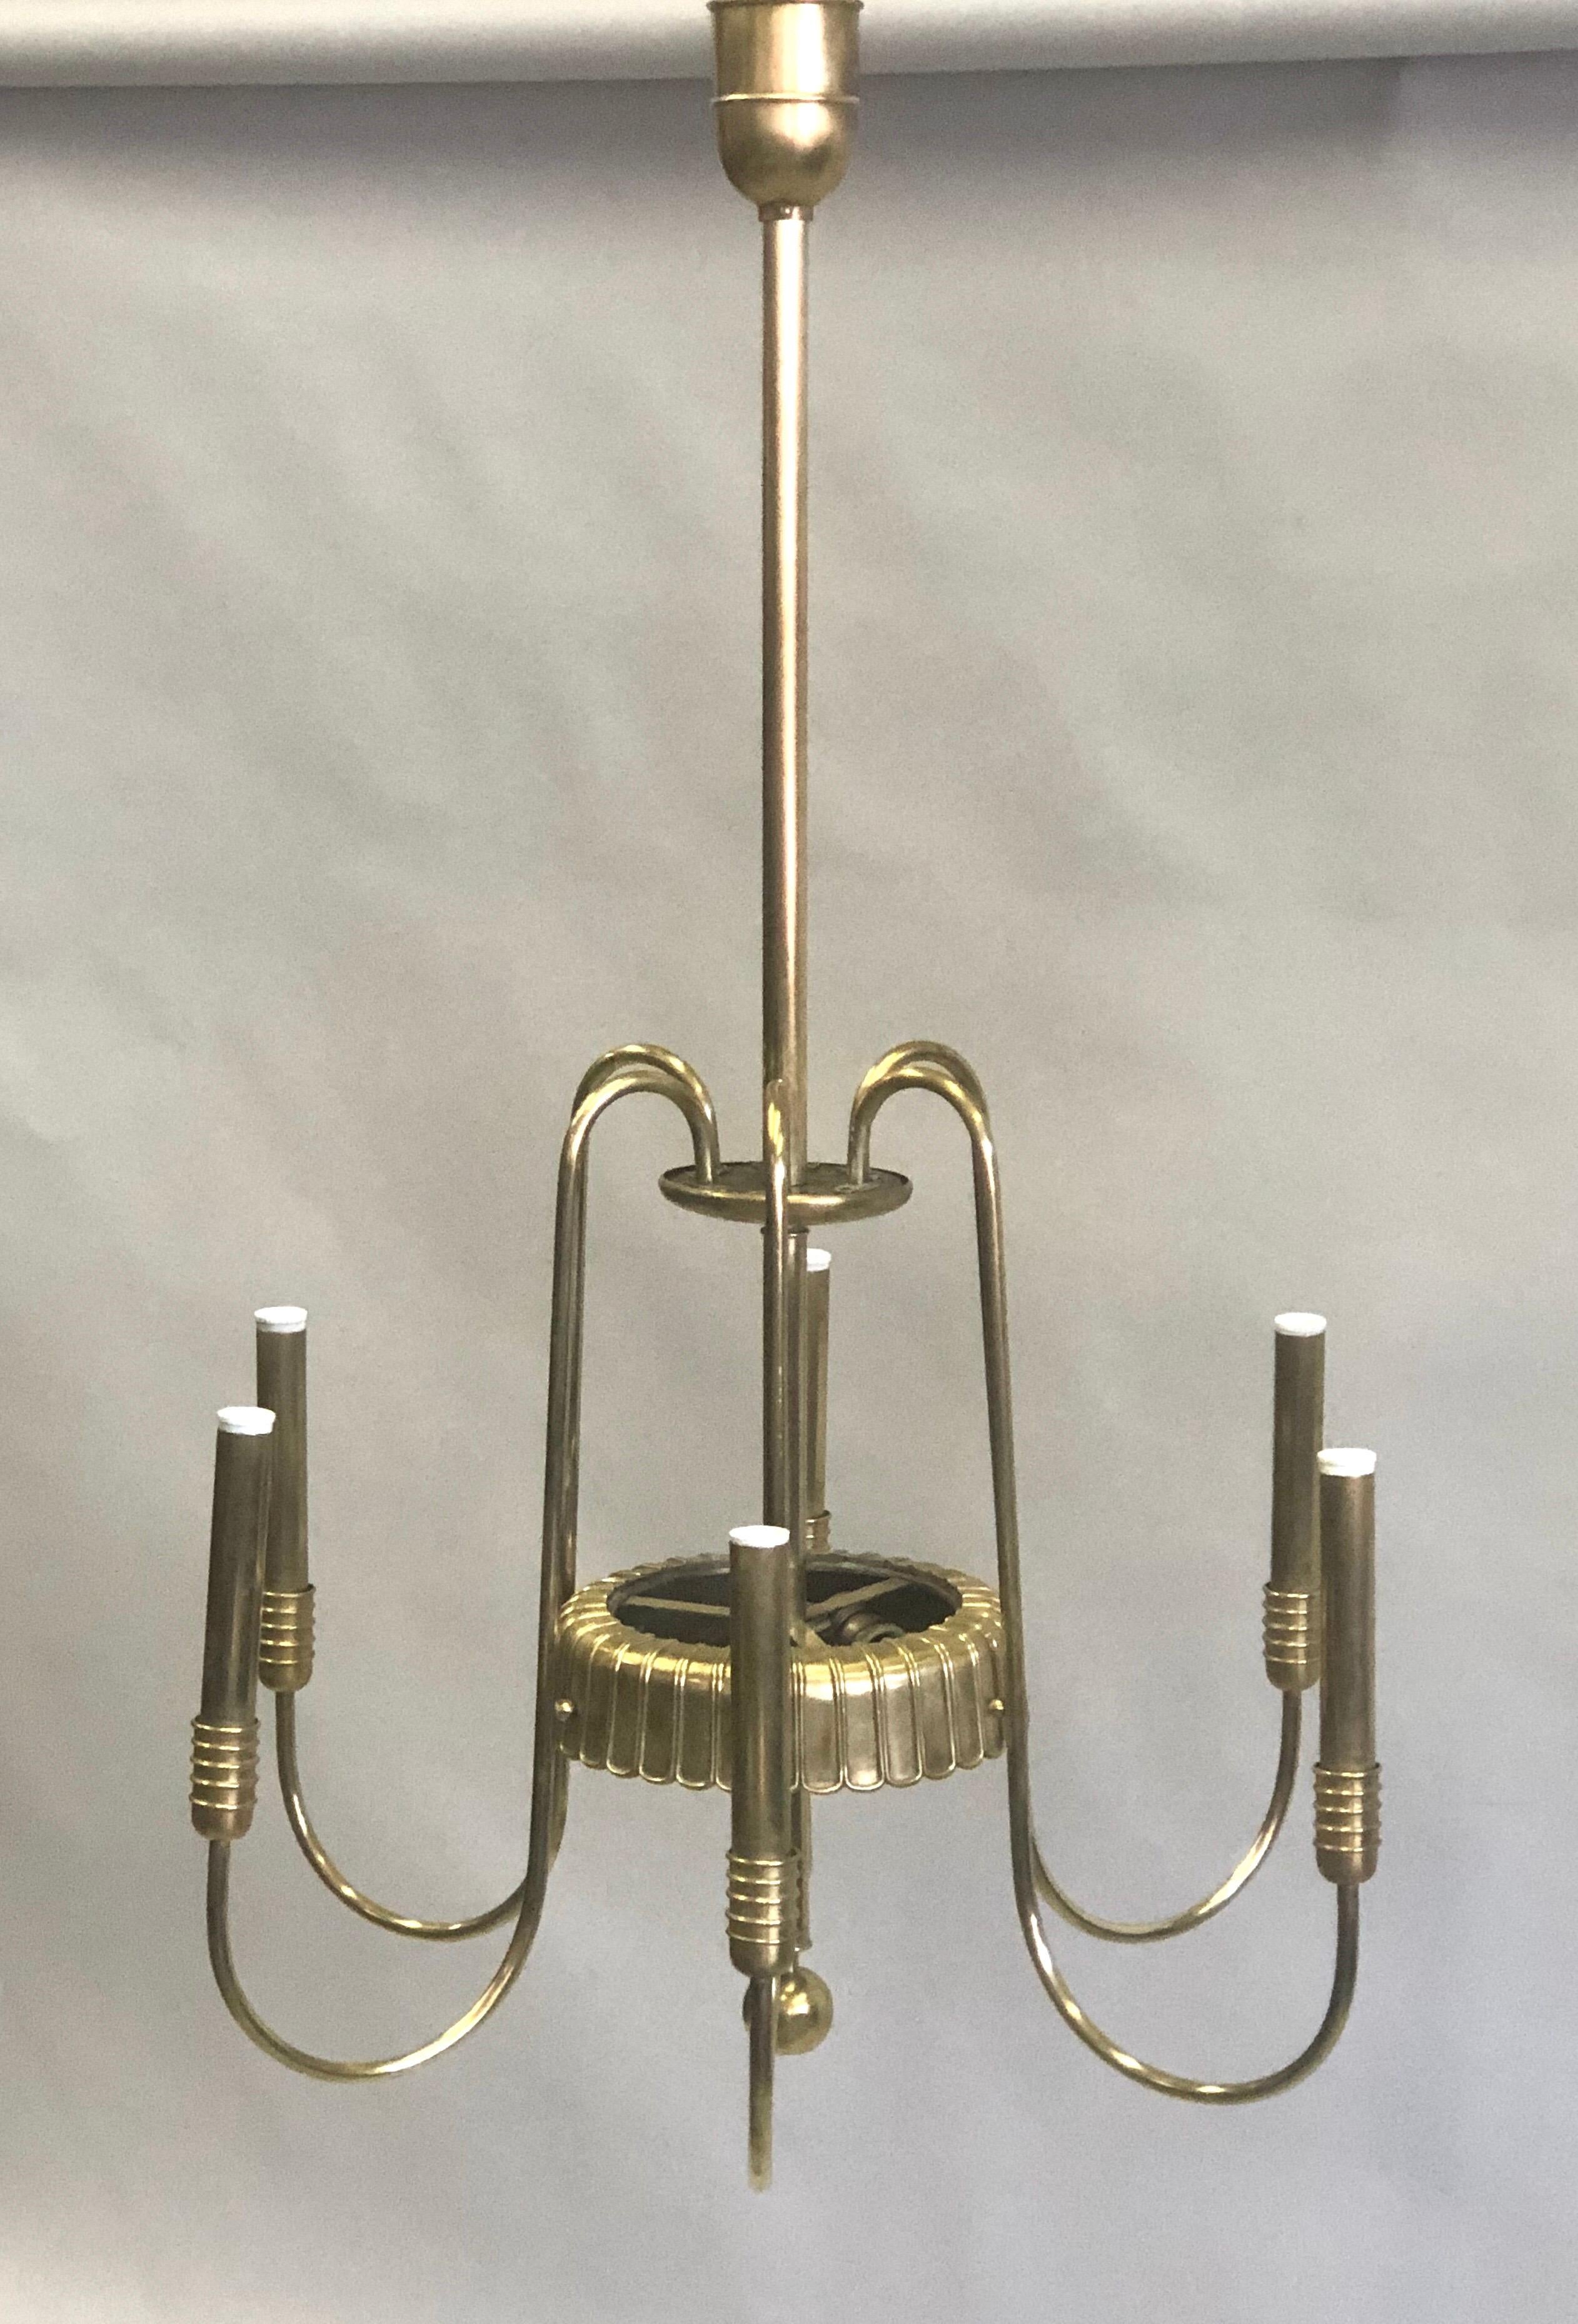 Elegant and timeless Italian Mid-Century Modern neoclassical / Art Deco chandelier in naturally antiqued solid brass designed by Luigi Brusotti for the manufacturer, Fontana Arte. The pieces has simple, pure lines that is contrasted with raised